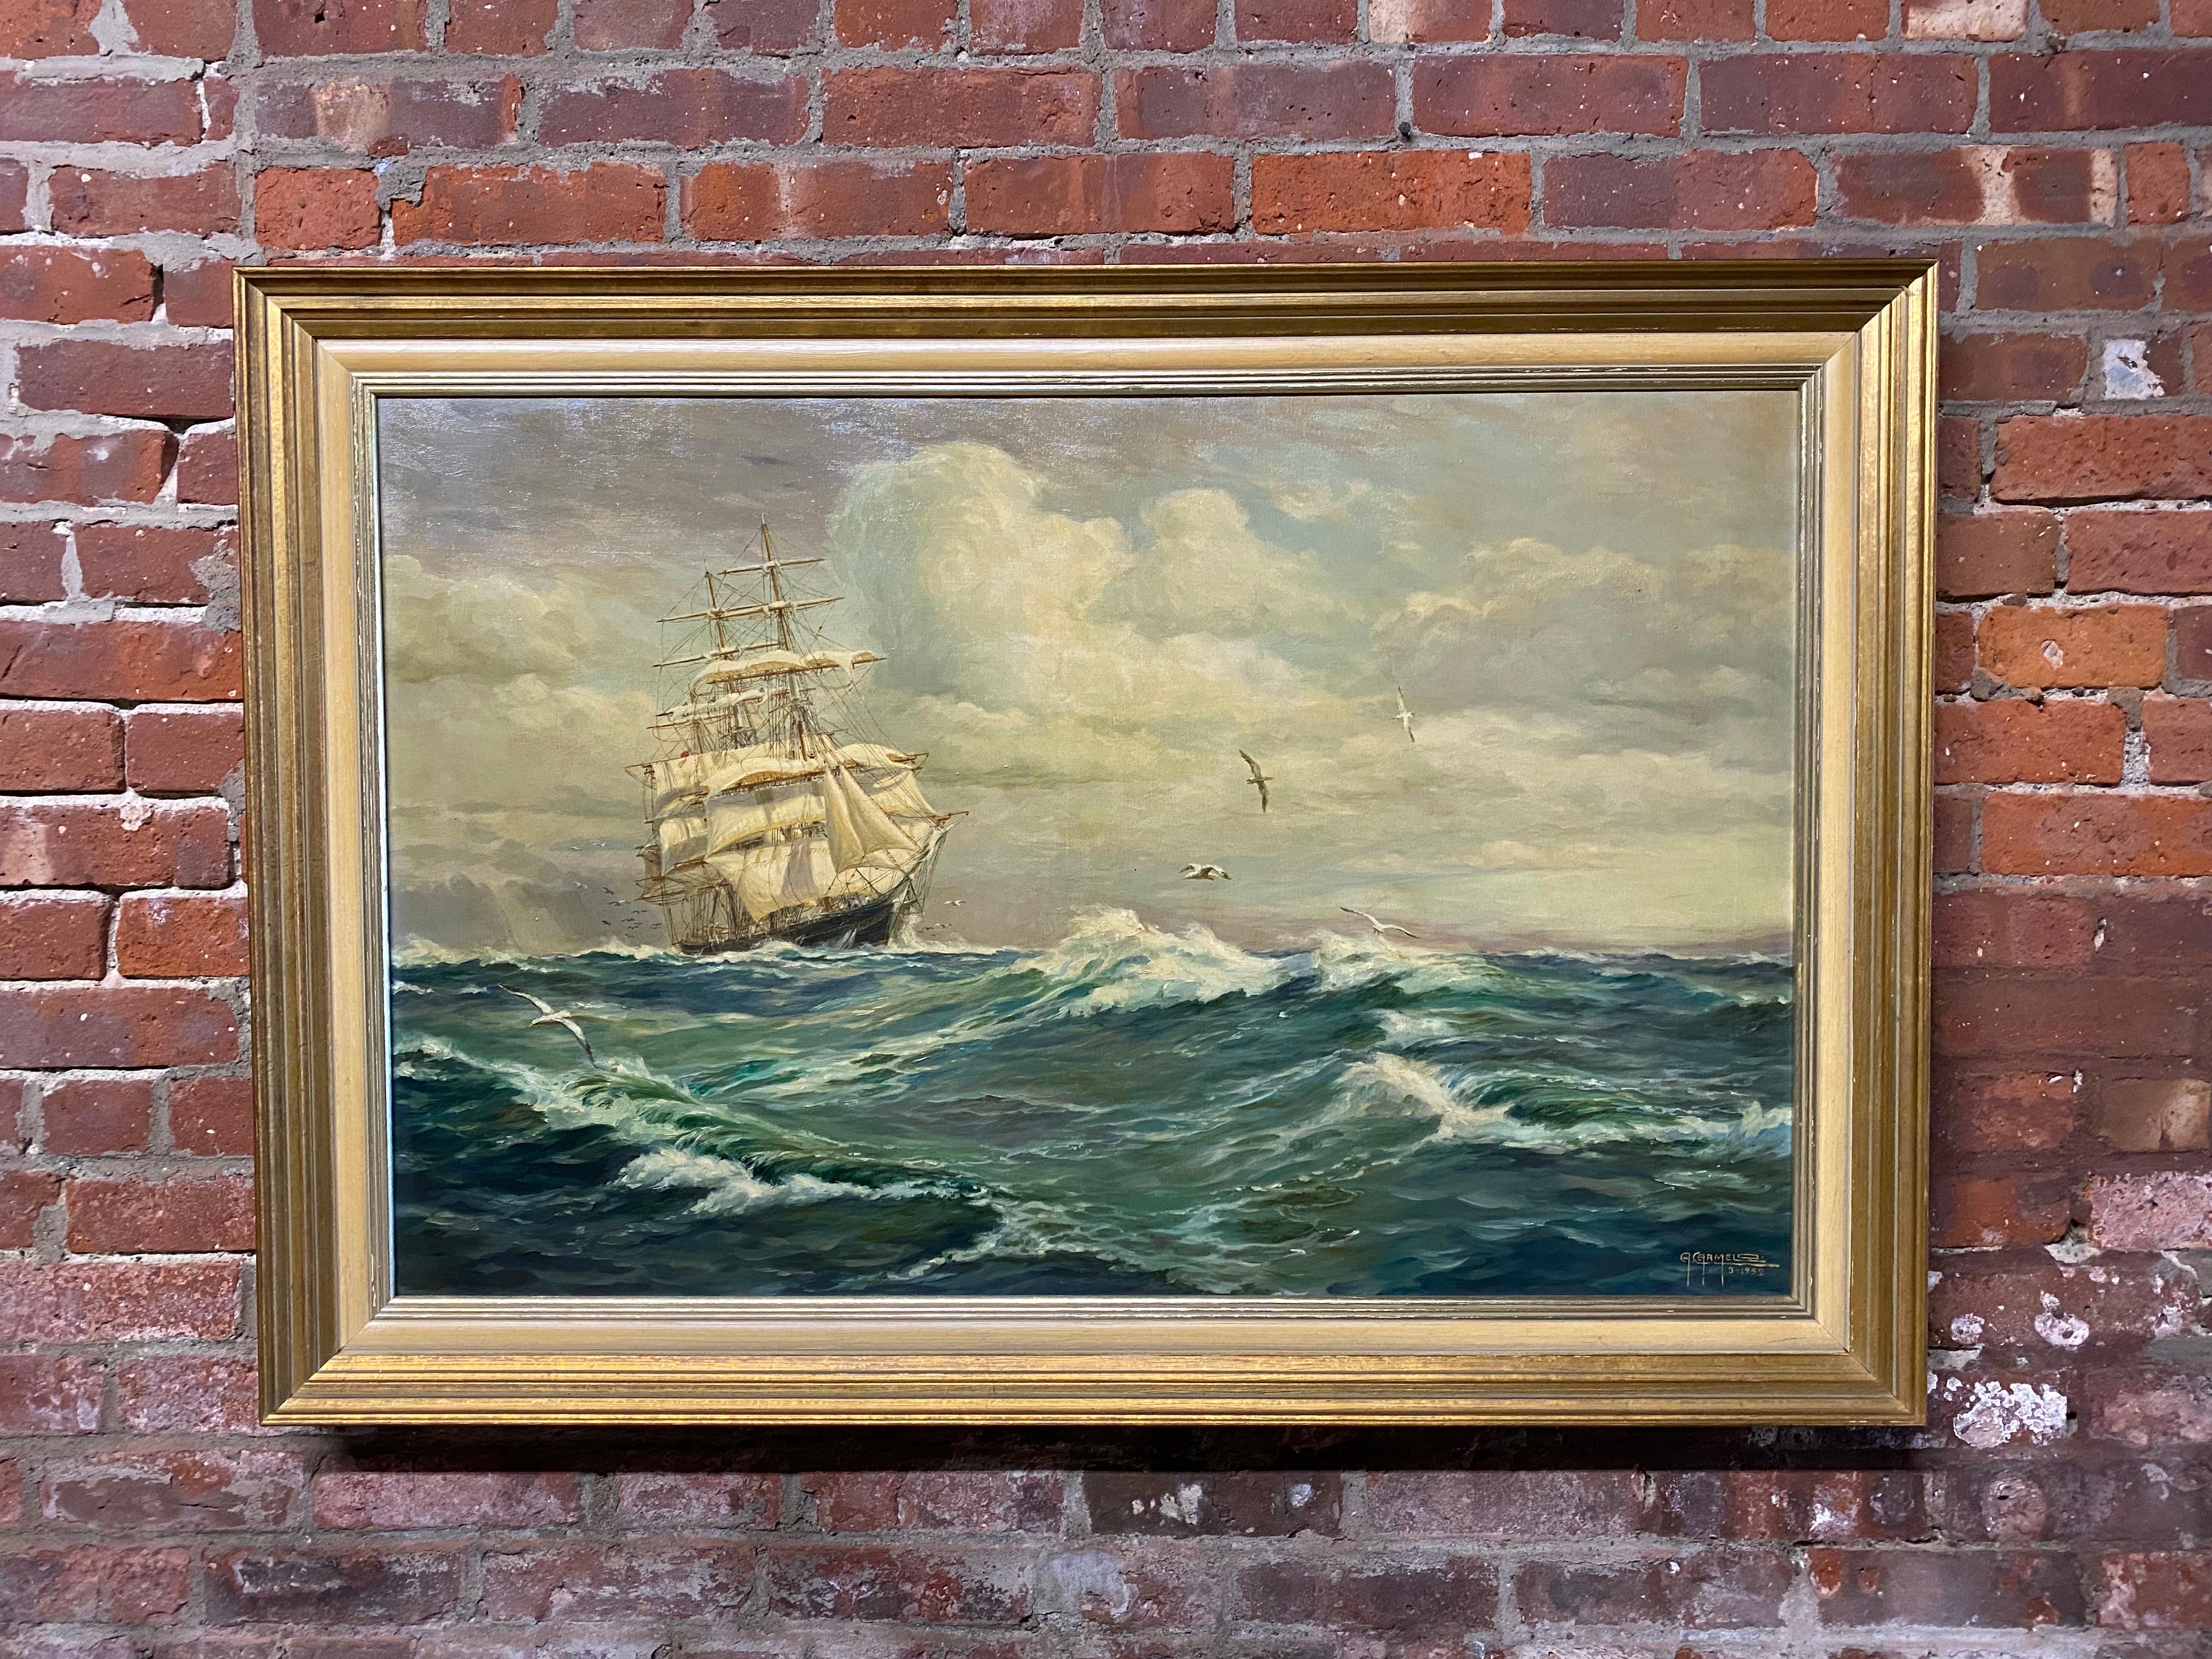 Alfredo Carmelo (1896-1985) was a Filipino artist known predominantly for marine, nautical and seascape genre. Dramatic rough wind driven seas. Oil paint on canvas. The framing treatment consists of a simple gilded wood molding. Signed and dated